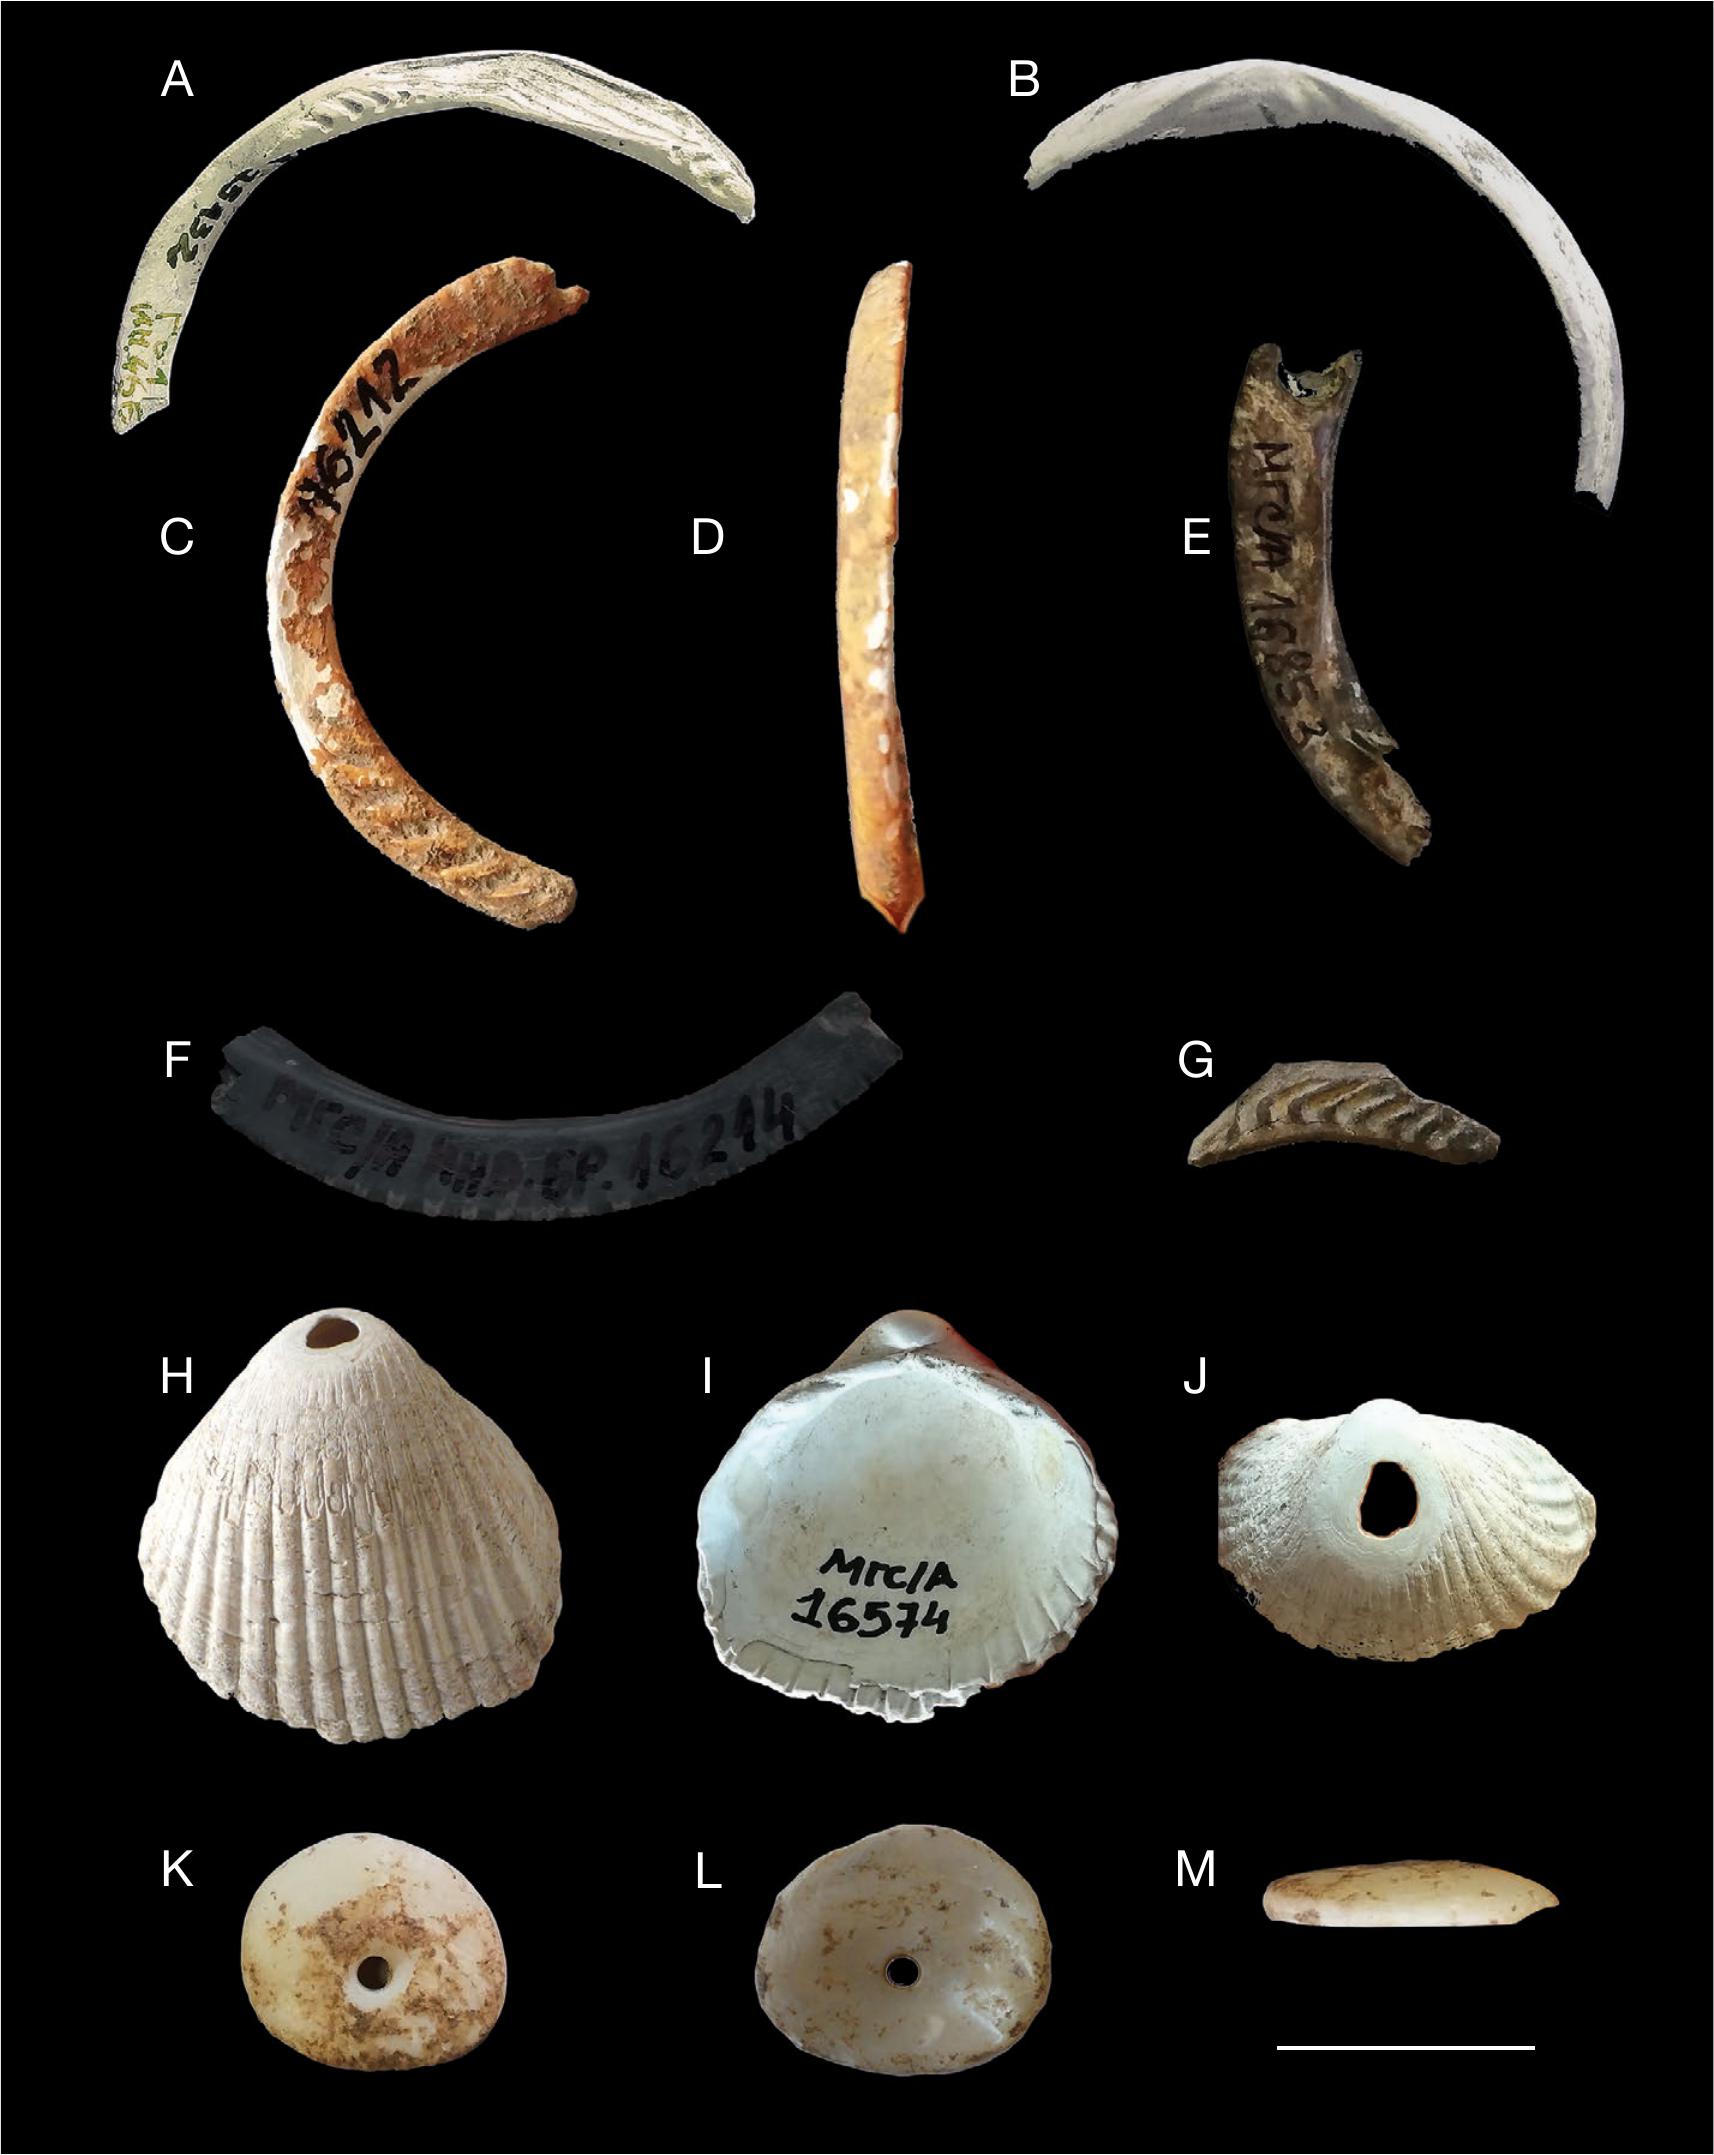 A String Of Marine Shell Beads From The Neolithic Site Of Vrsnik Tarinci Ovce Pole And Other Marine Shell Ornaments In The Neolithic Of North Macedonia